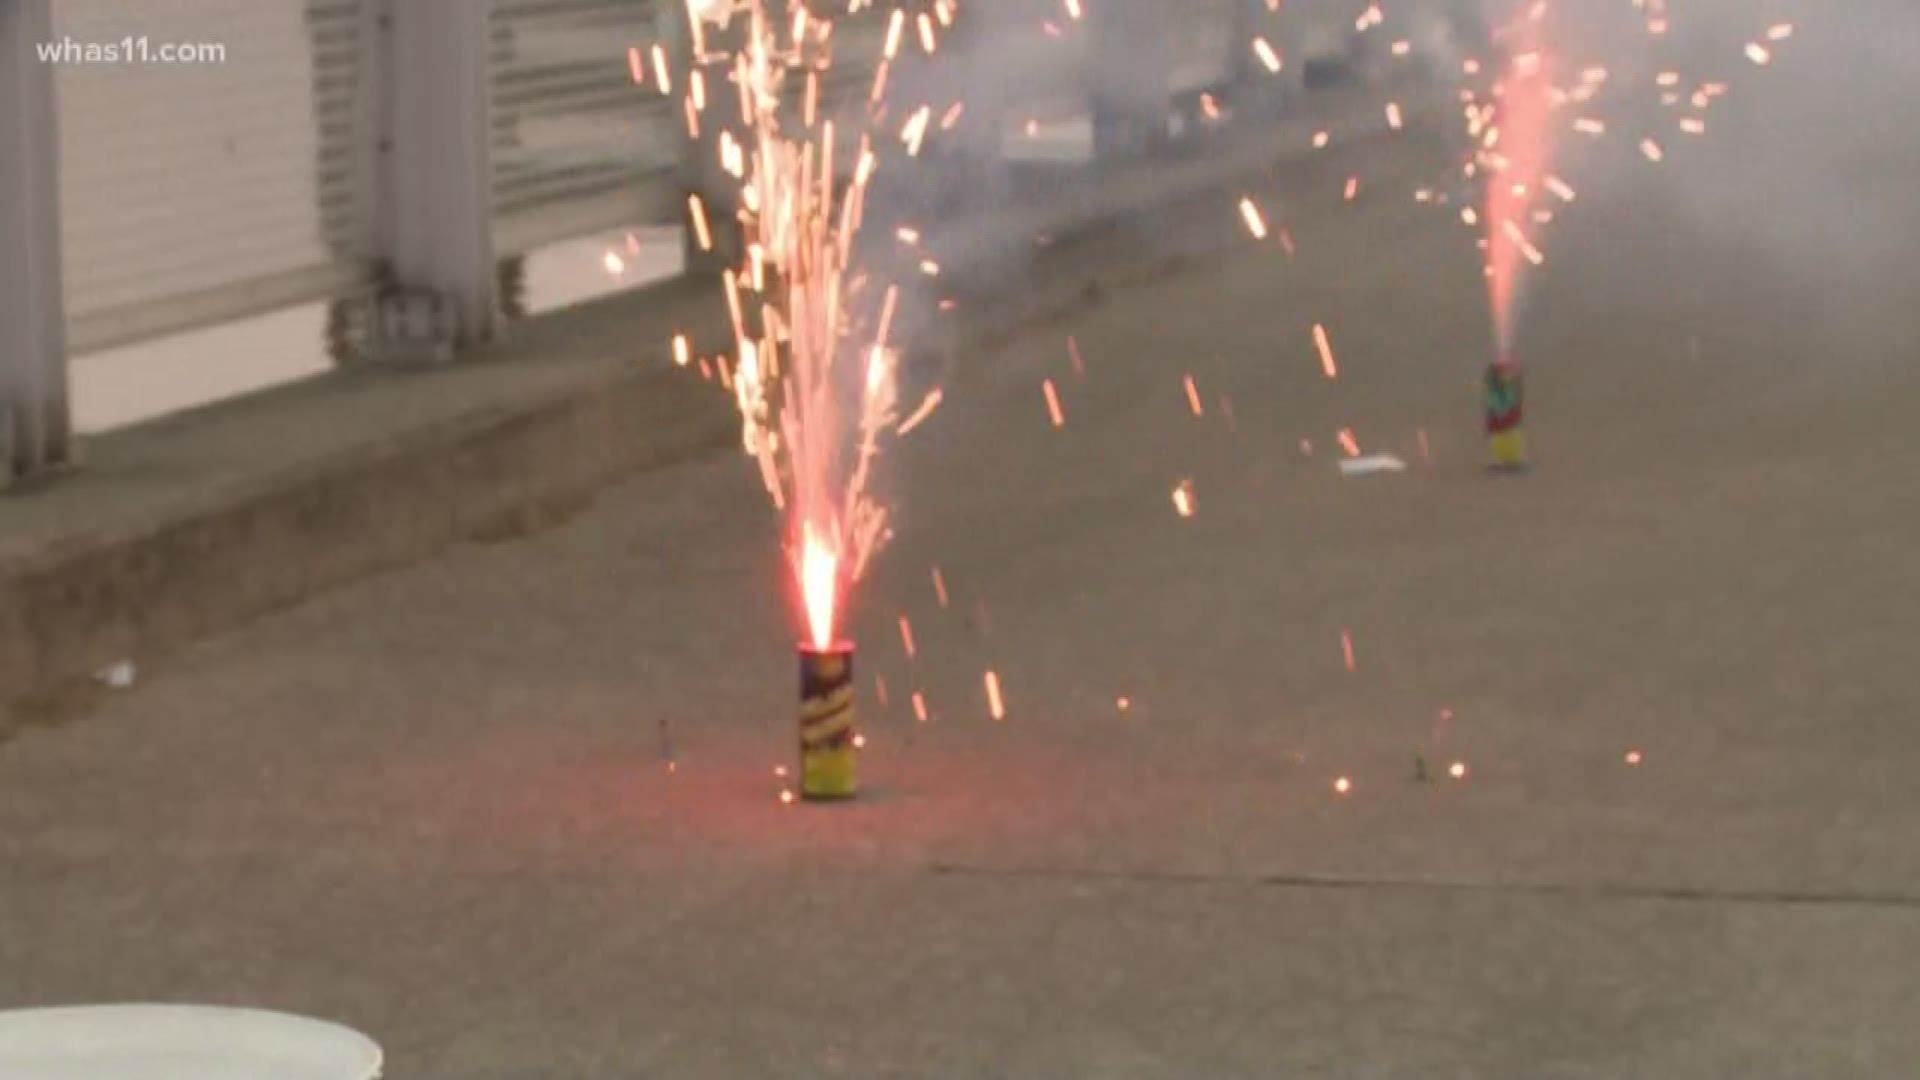 The 4th of July is all fun and games until someone gets hurt with a sparkler or firework. Louisville Fire has some tips on how to stay safe.